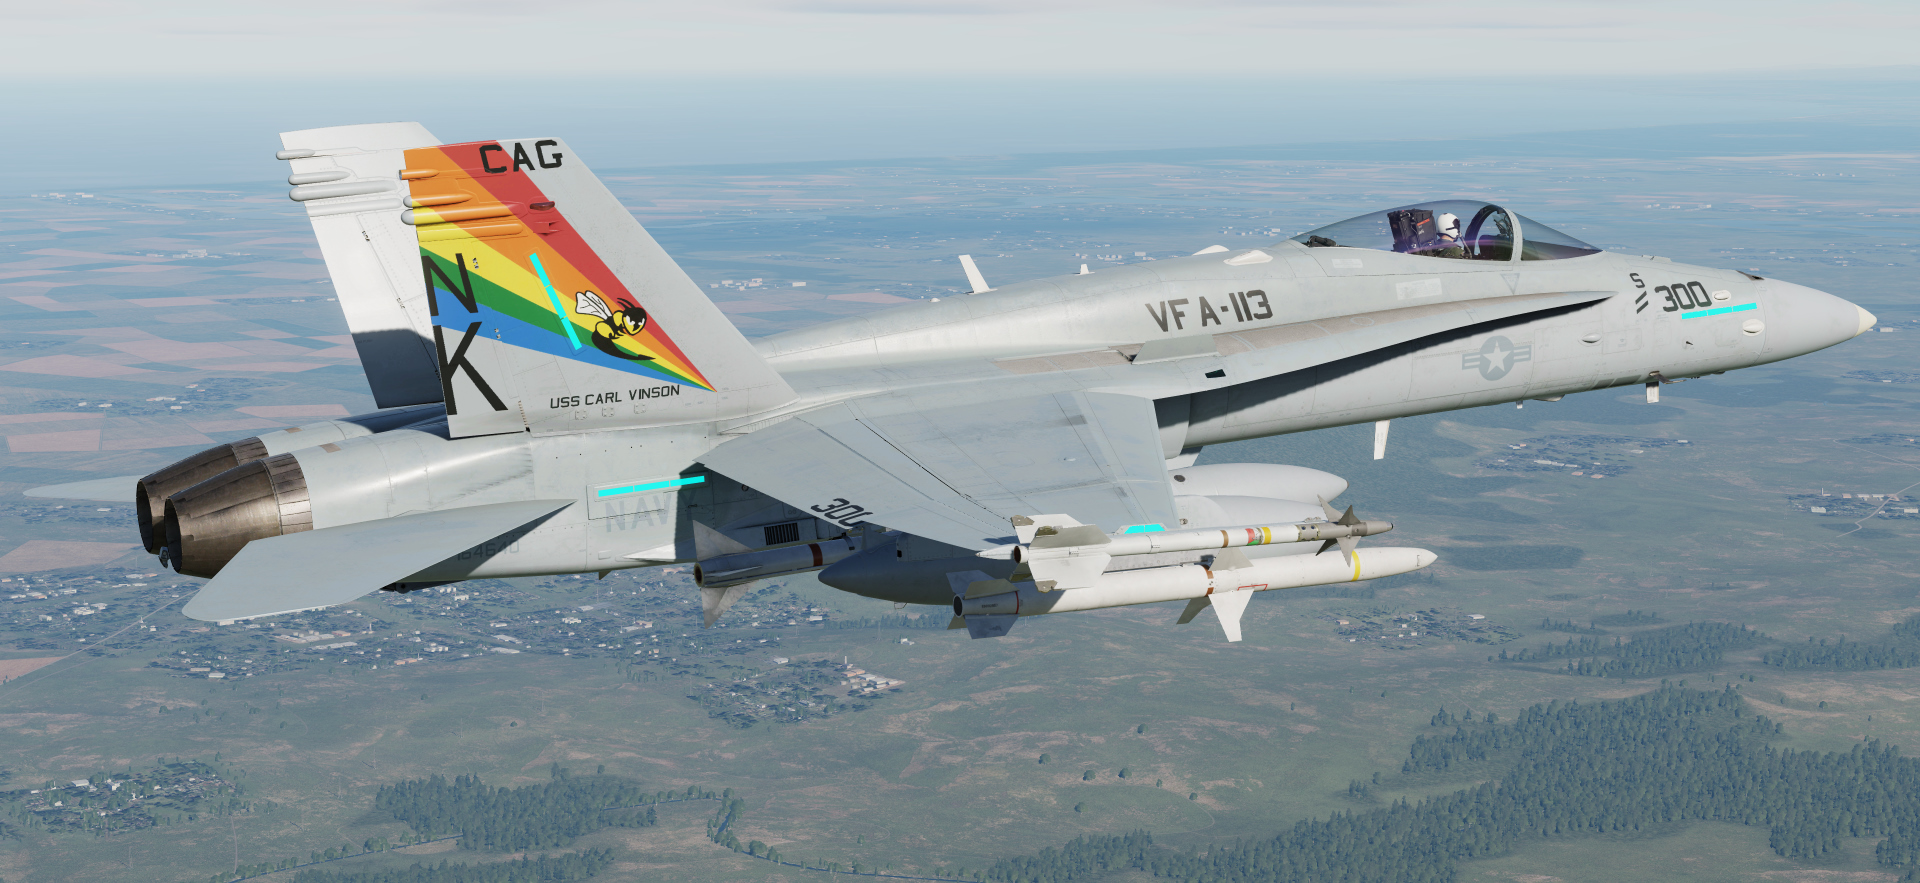 VFA-113 CAG and Line Liveries